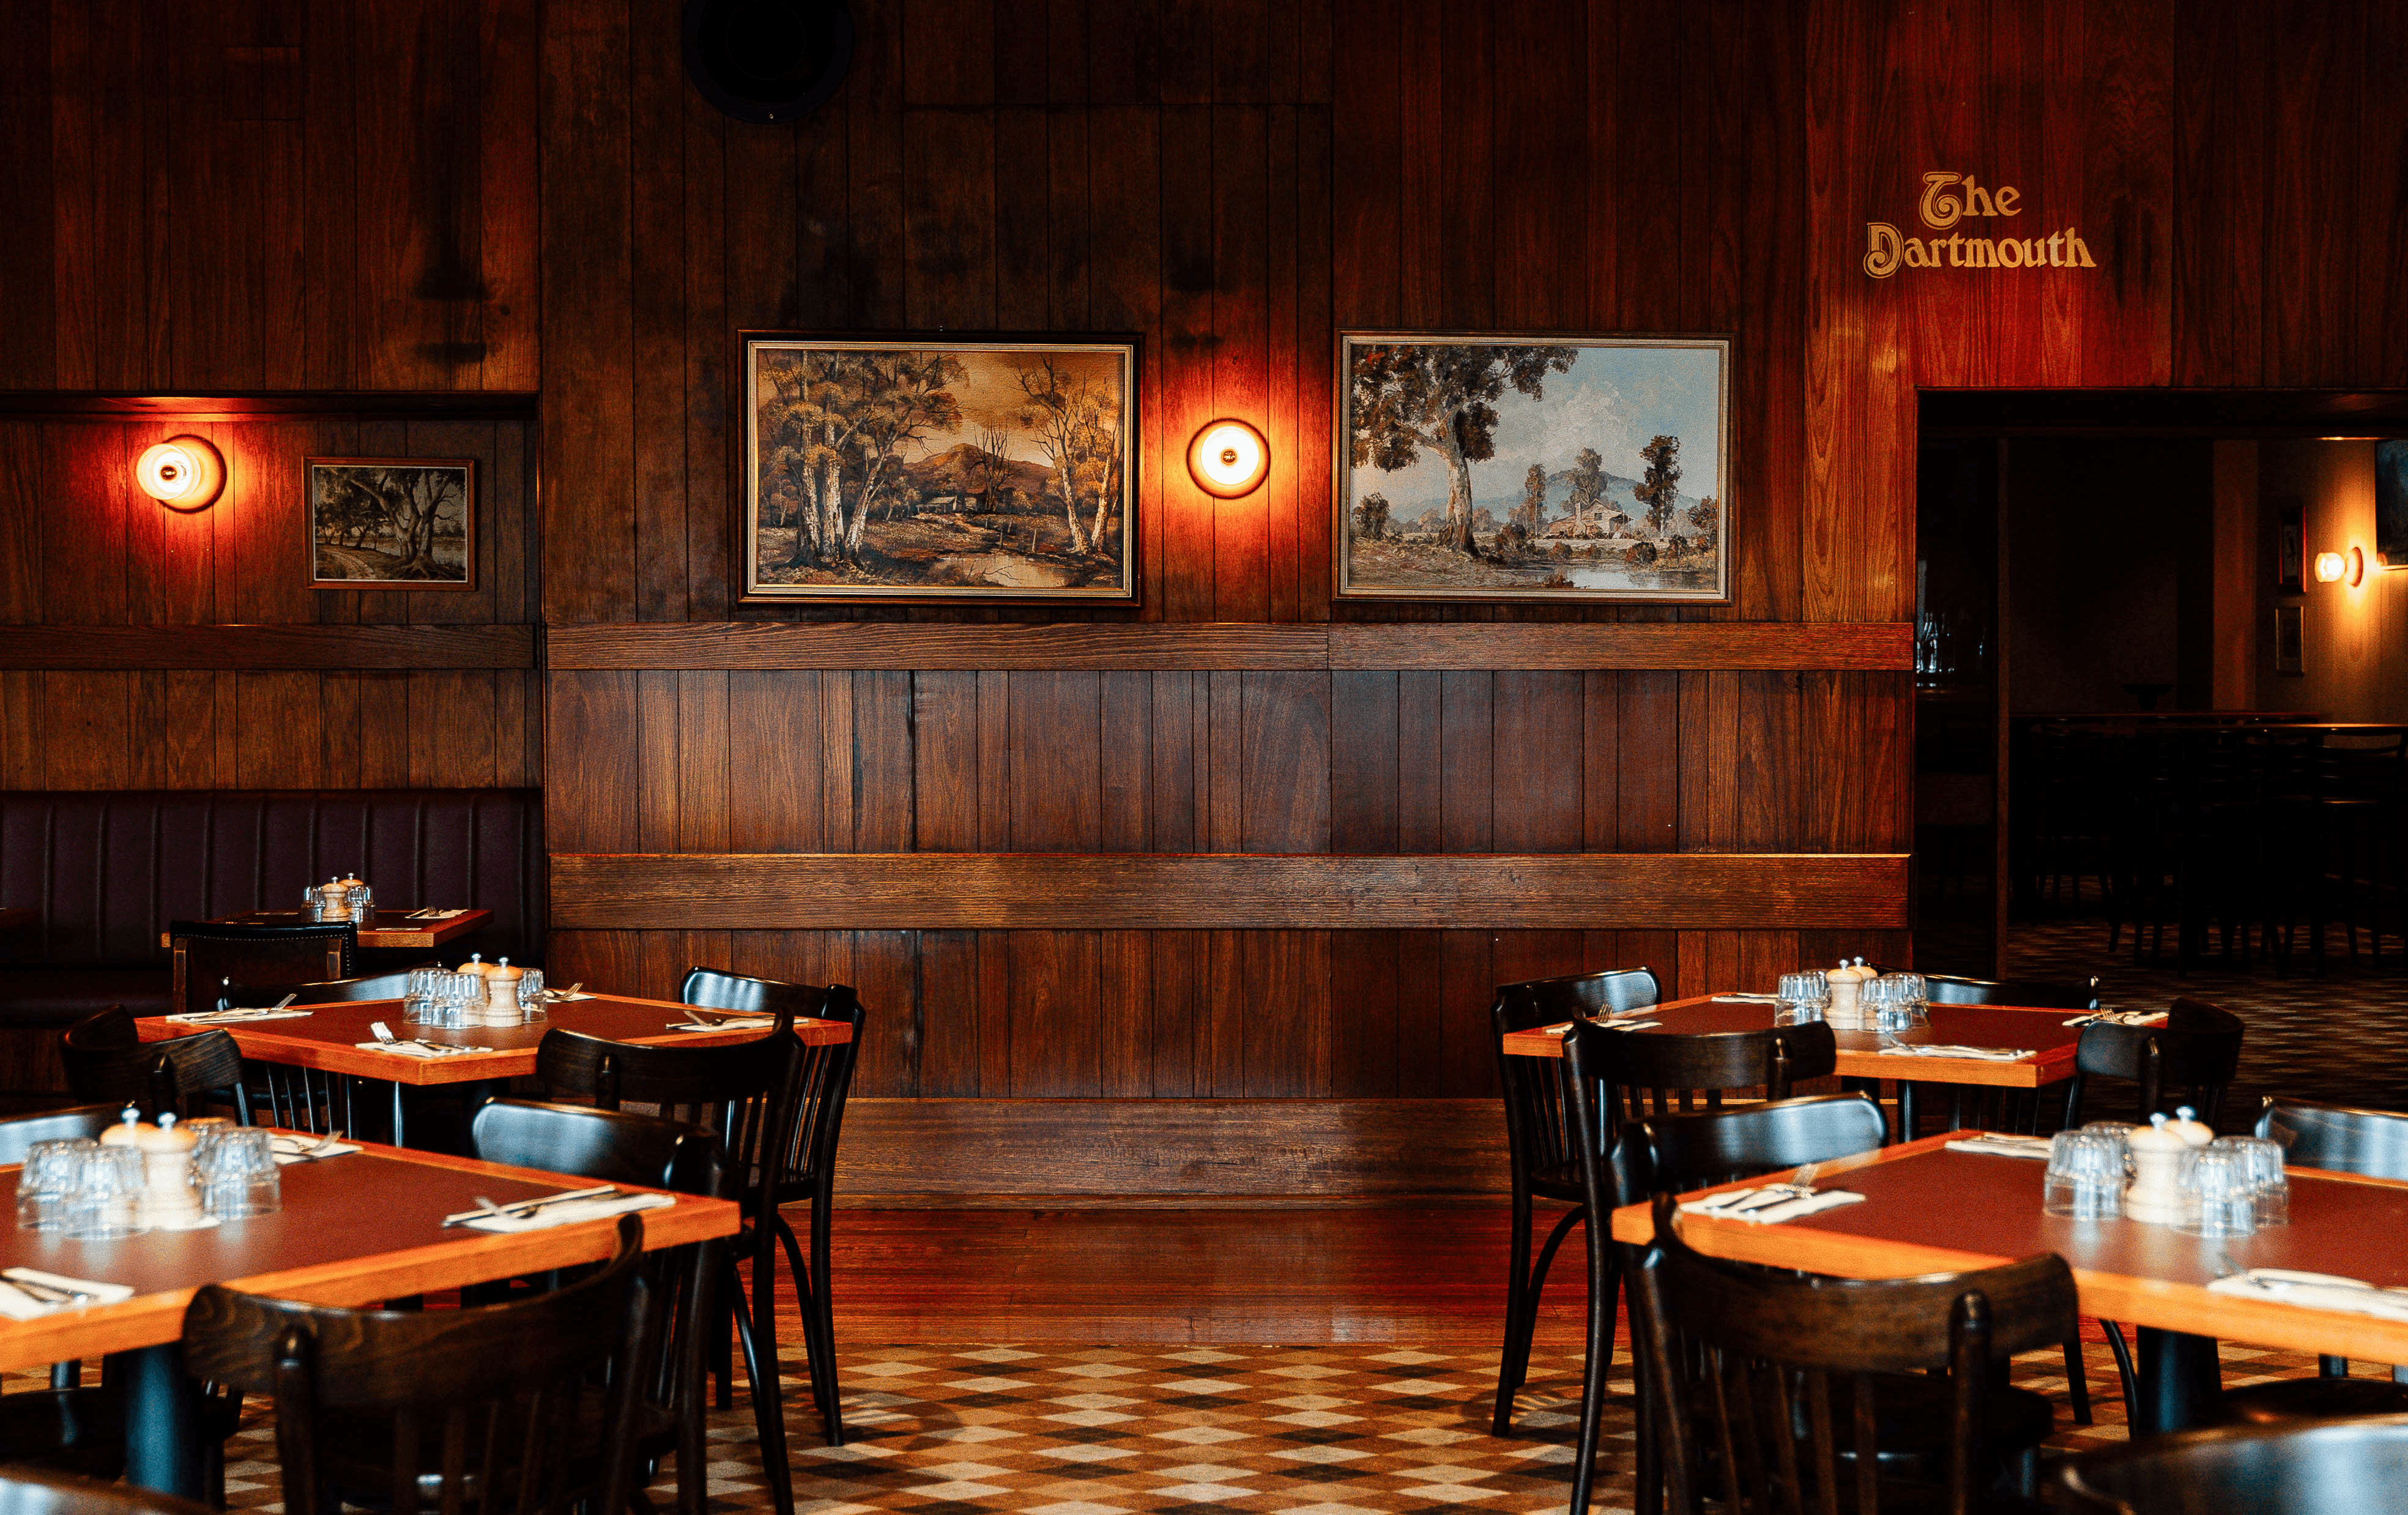 A 70s-style dining room with prints on the wall at one of the best pubs in Melbourne.